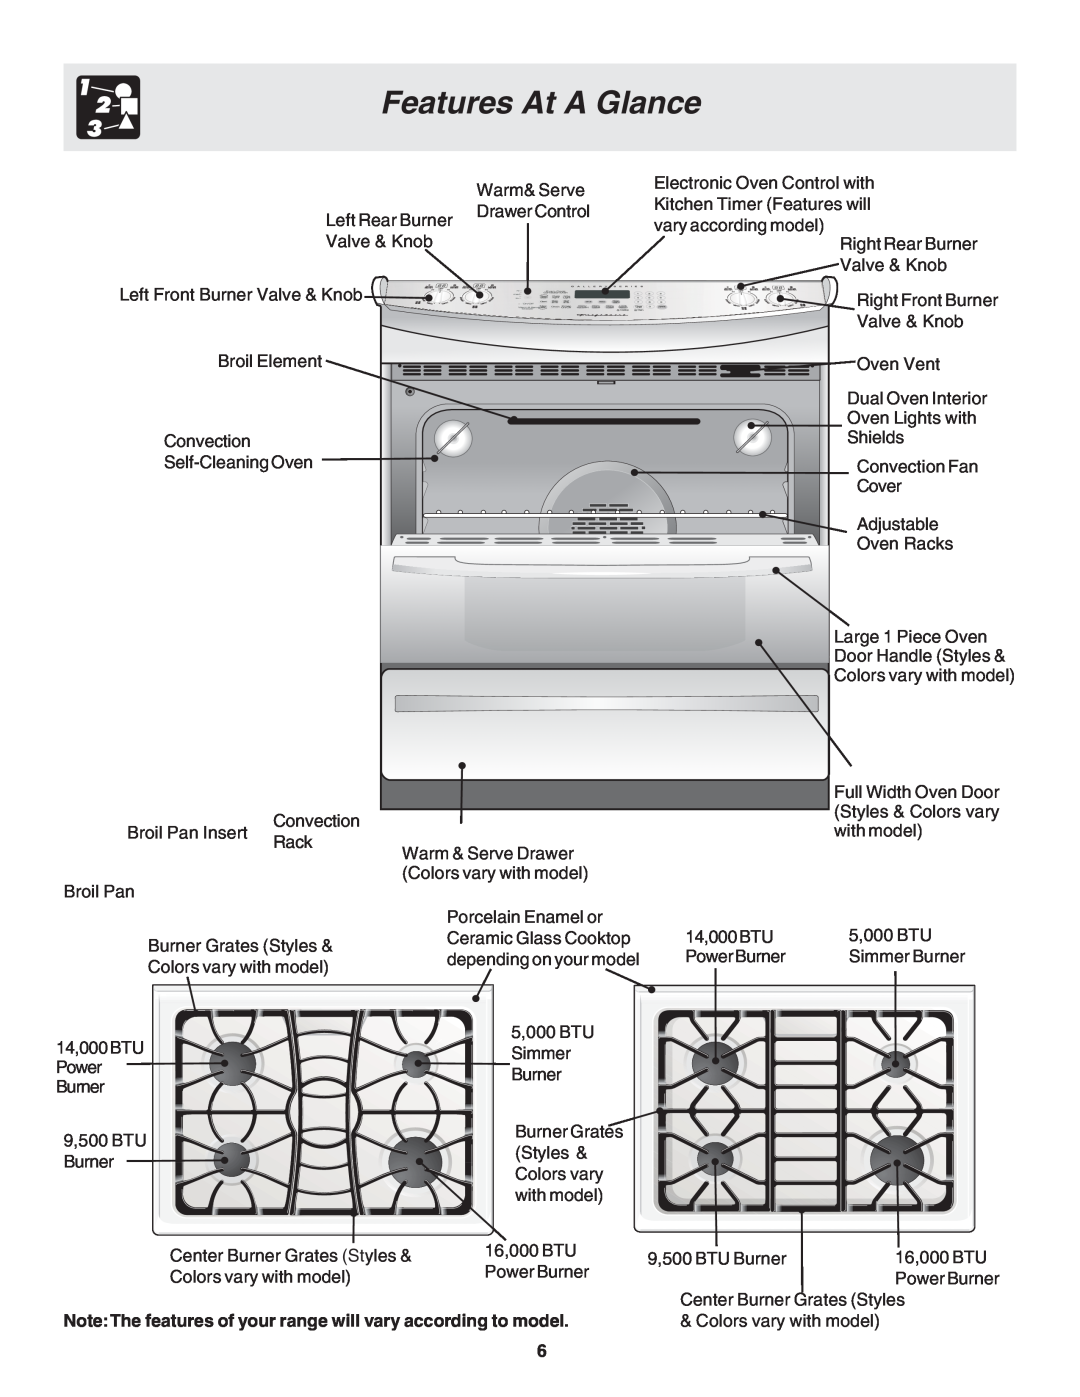 Frigidaire 318203875 warranty Features At A Glance, NoteThe features of your range will vary according to model 